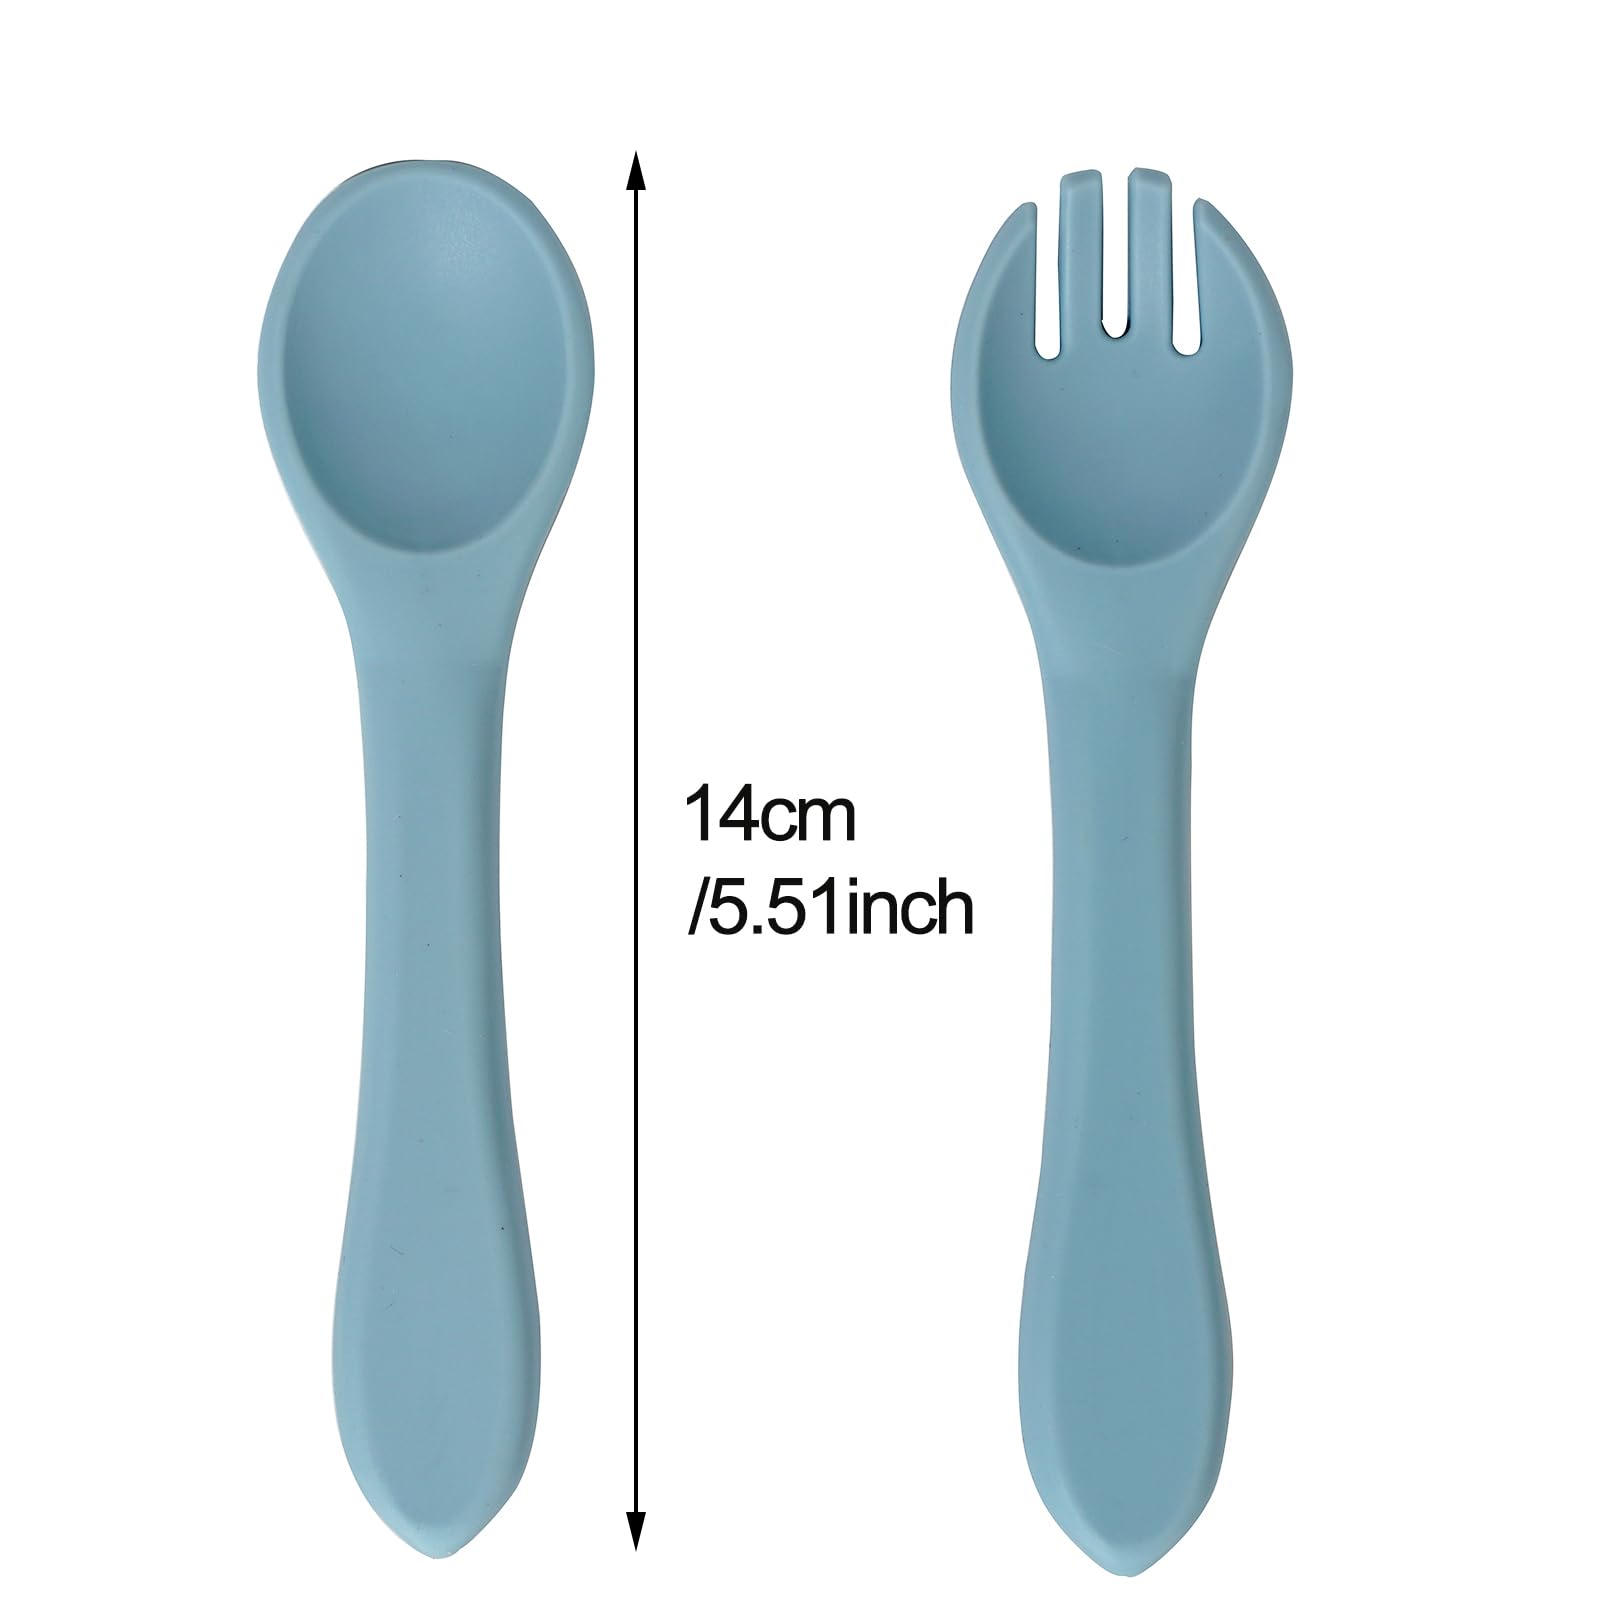 6pcs Baby Weaning Supplies, Silicone Baby Feeding Set, Suction Cup Divider with Suction Cup Adjustable Bib Soft Spoon Fork, Baby Self-Feeder Toddler Dinnerware Cutlery 6pack (Blue)